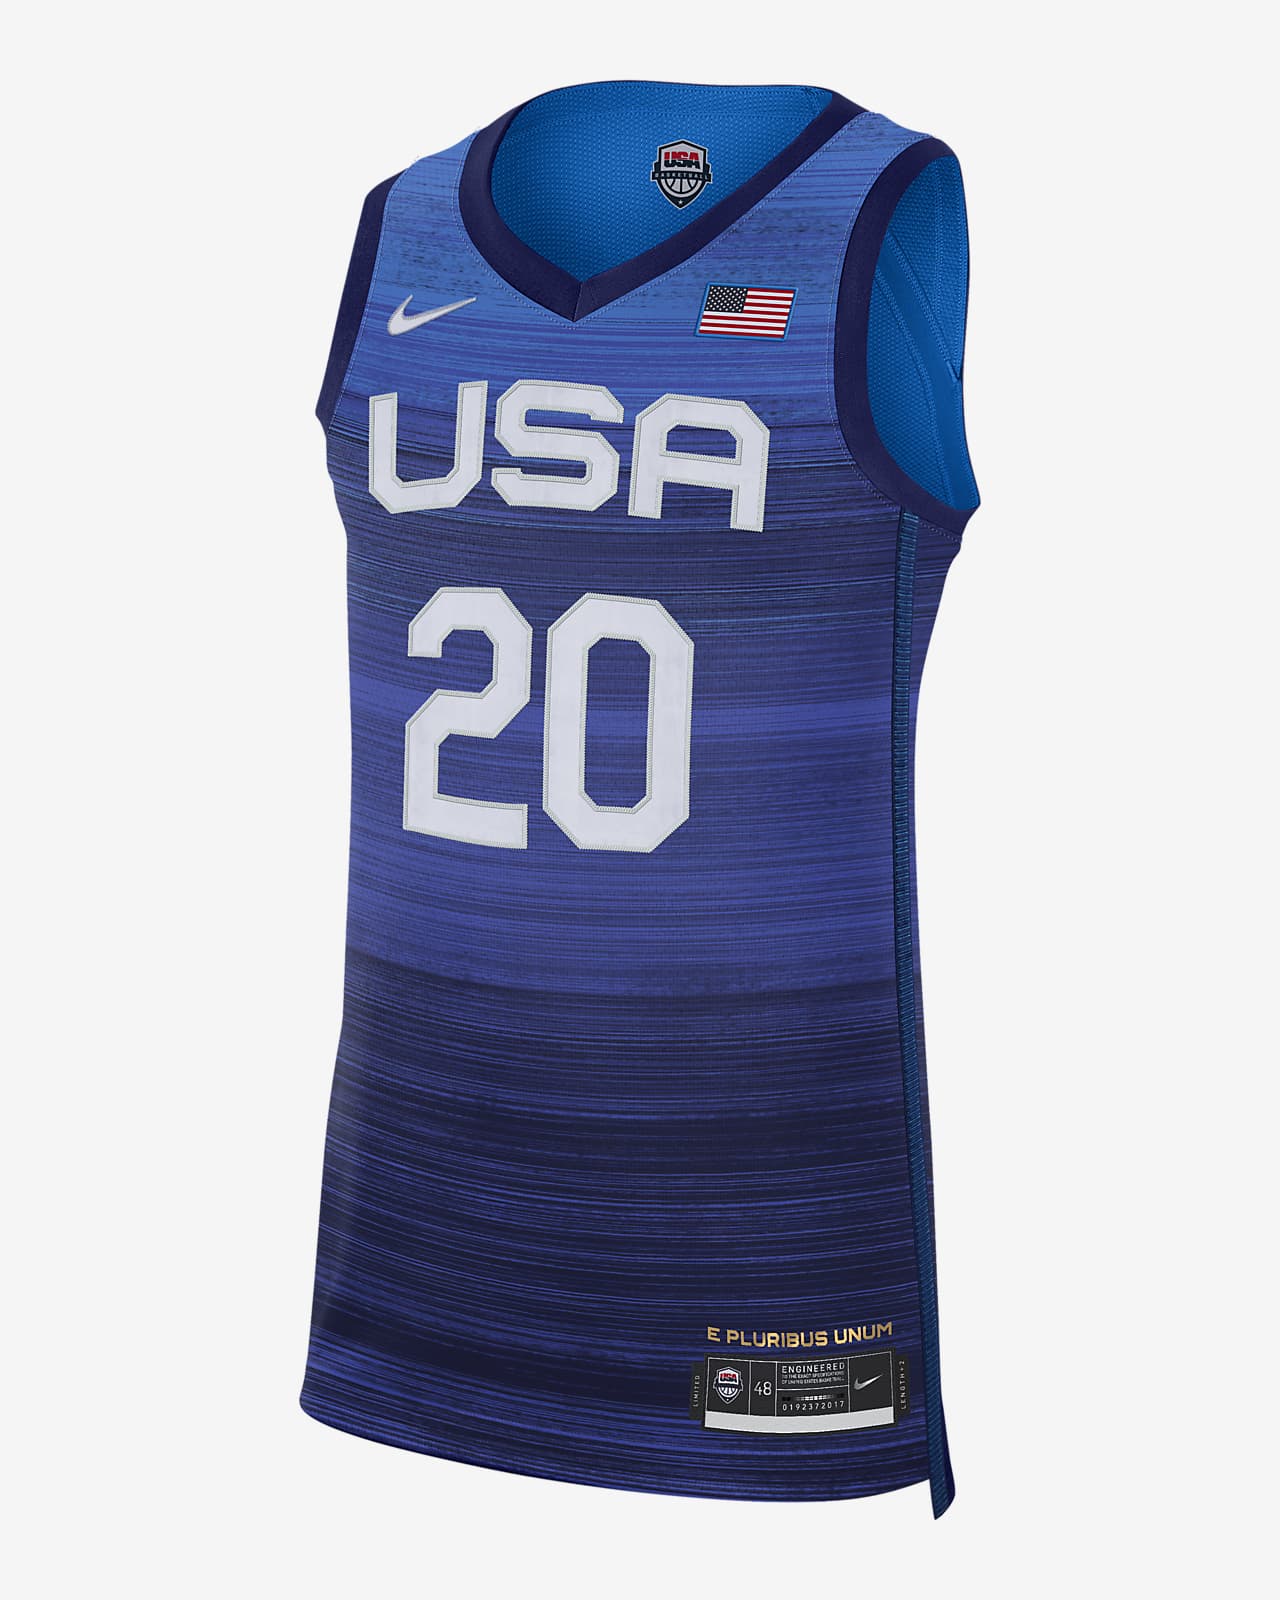 USA (Road) Authentic Men's Nike Basketball Jersey